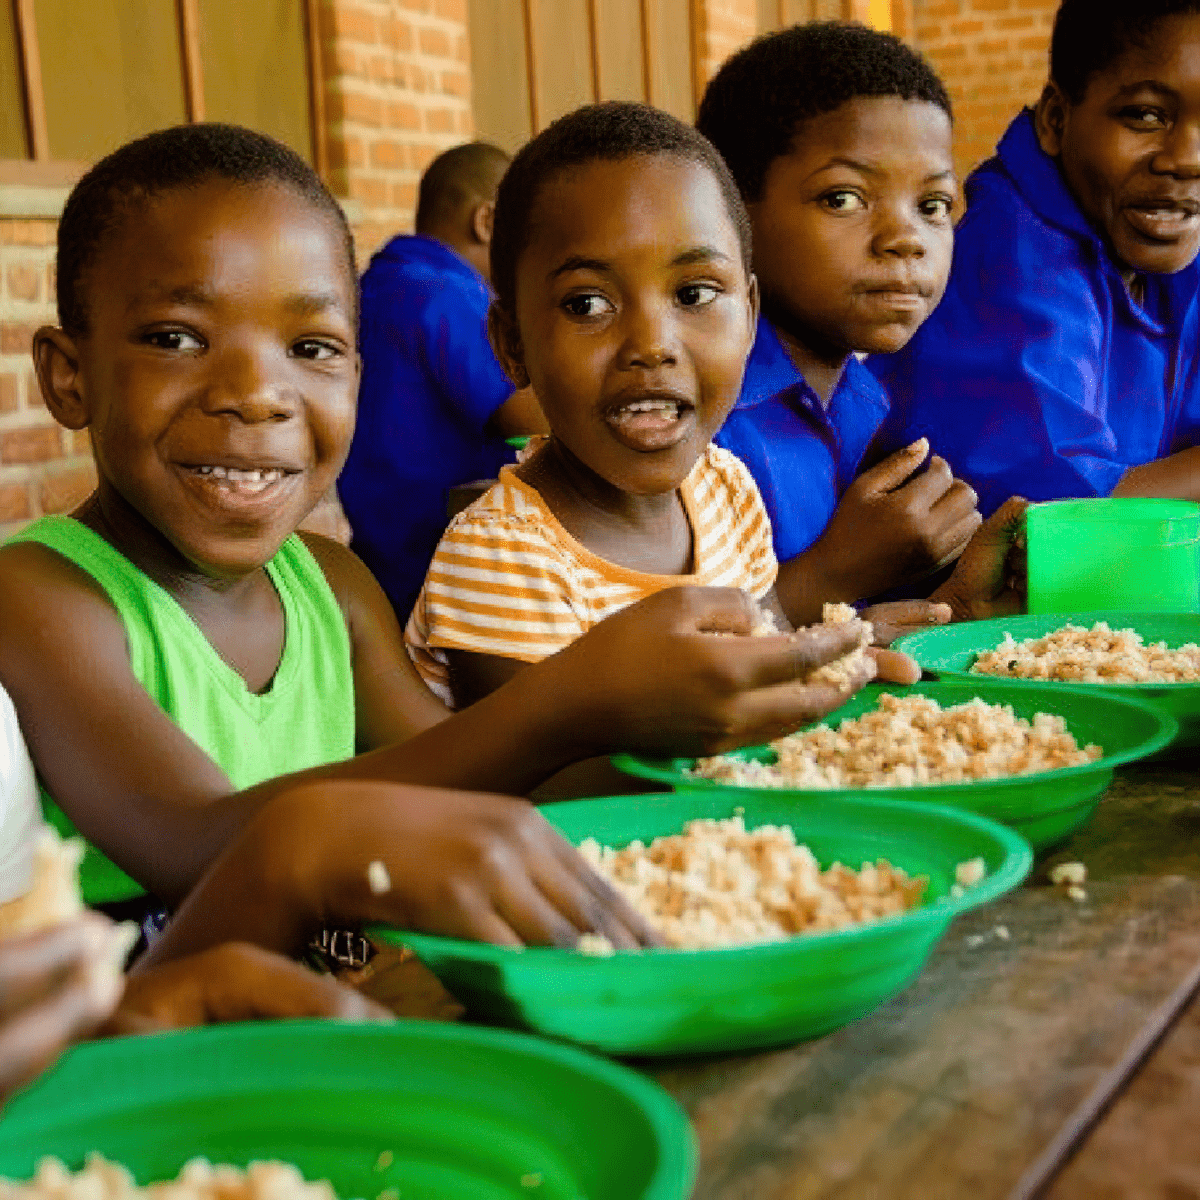 Rise Against Hunger has impacted 1.8 million people in 78 countries - they have packaged and distributed more than 543 million meals.